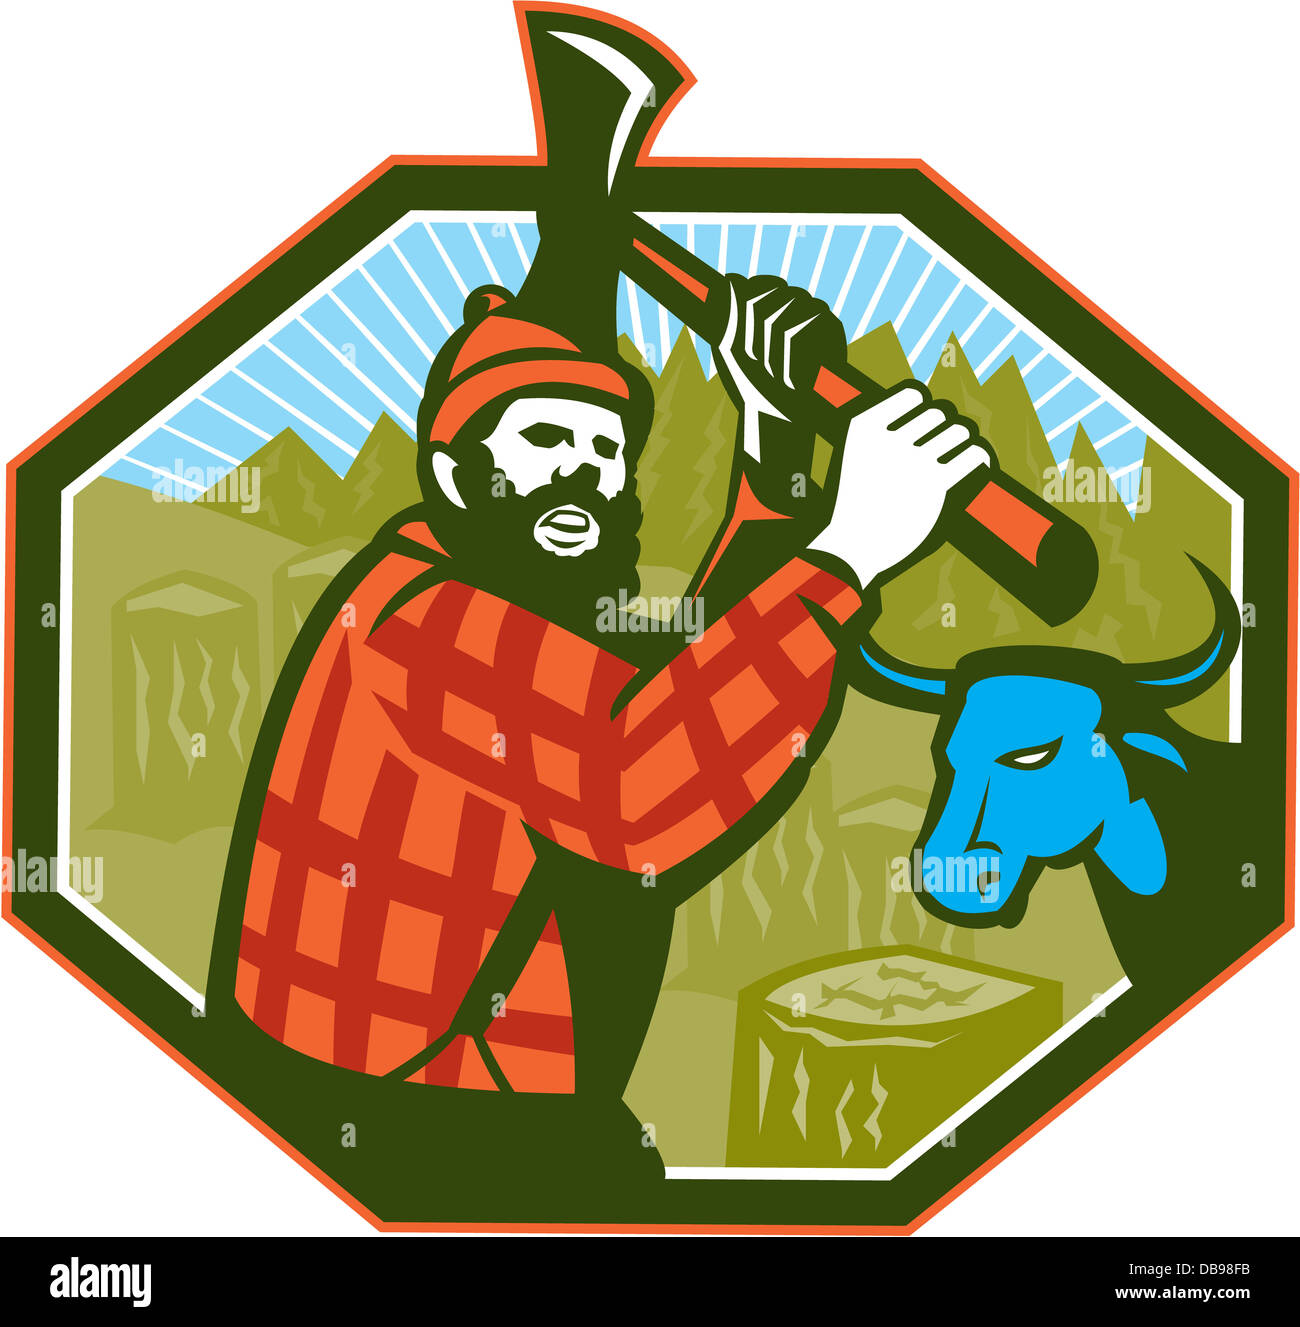 Illustration of Paul Bunyan a lumberjack sawyer forest worker swinging an axe with tree stumps and Babe the blue ox bull cow in Stock Photo